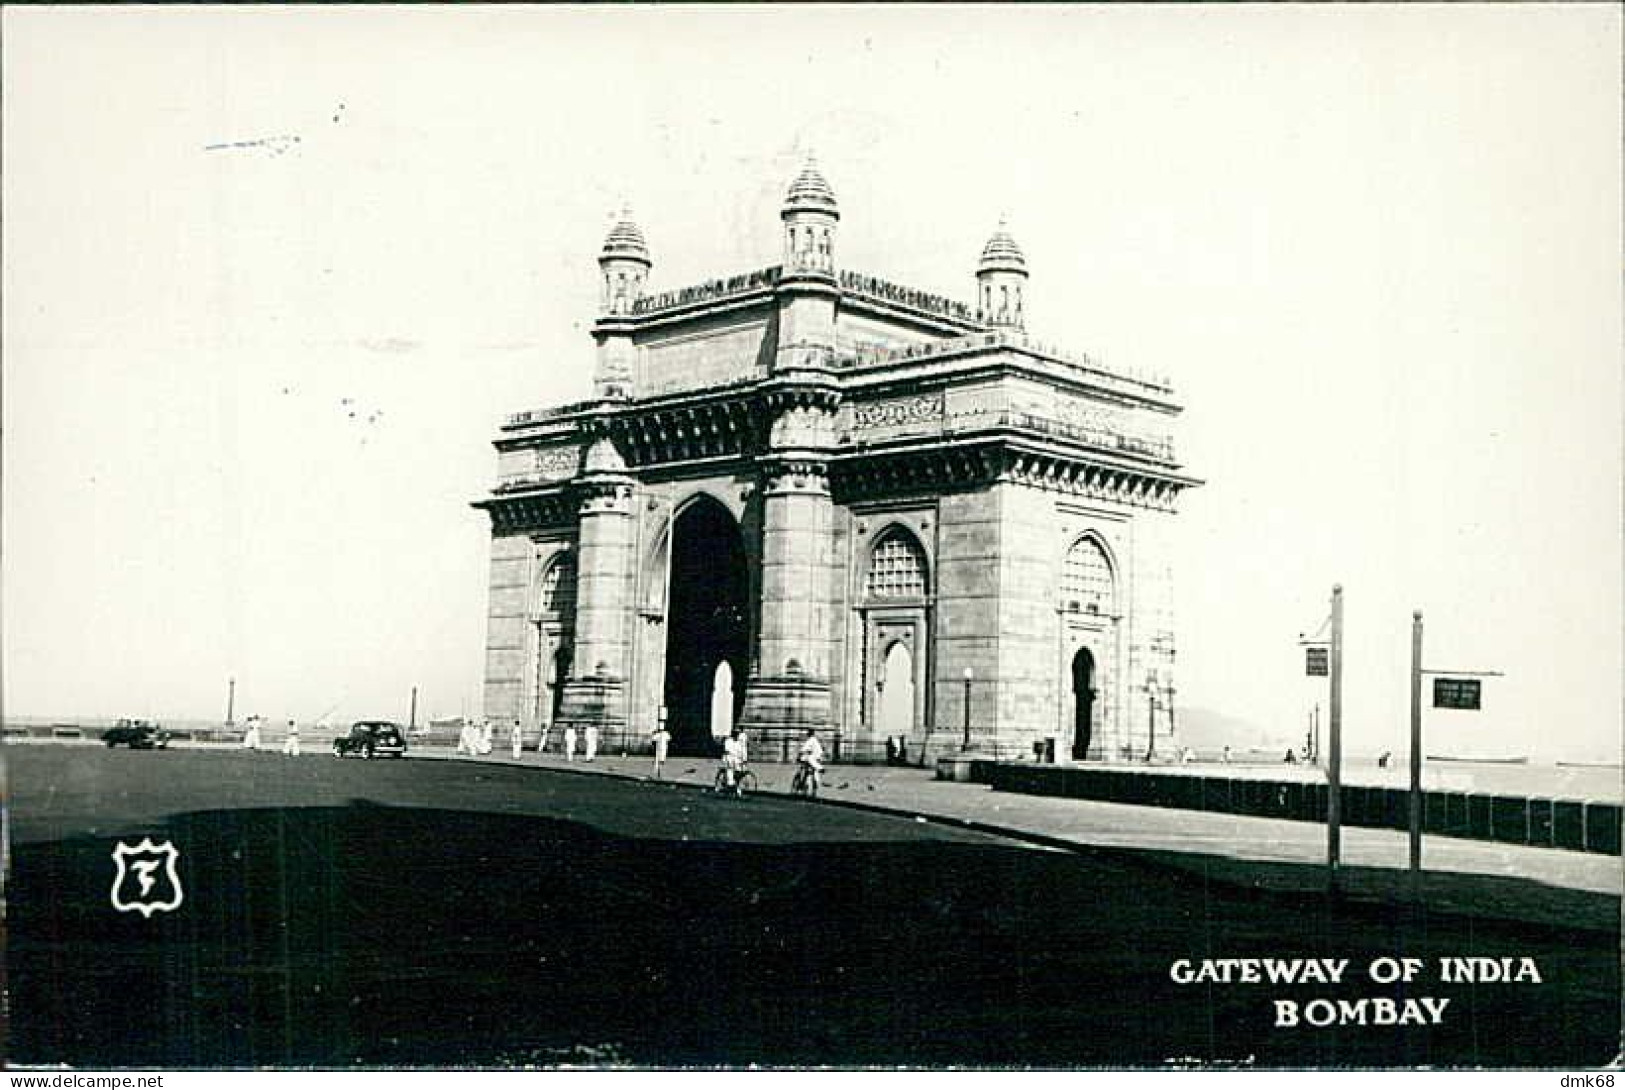 INDIA - GATEWAY OF INDIA - BOMBAY  - RPPC POSTCARD - MAILED 1959 / STAMPS (18376) - India